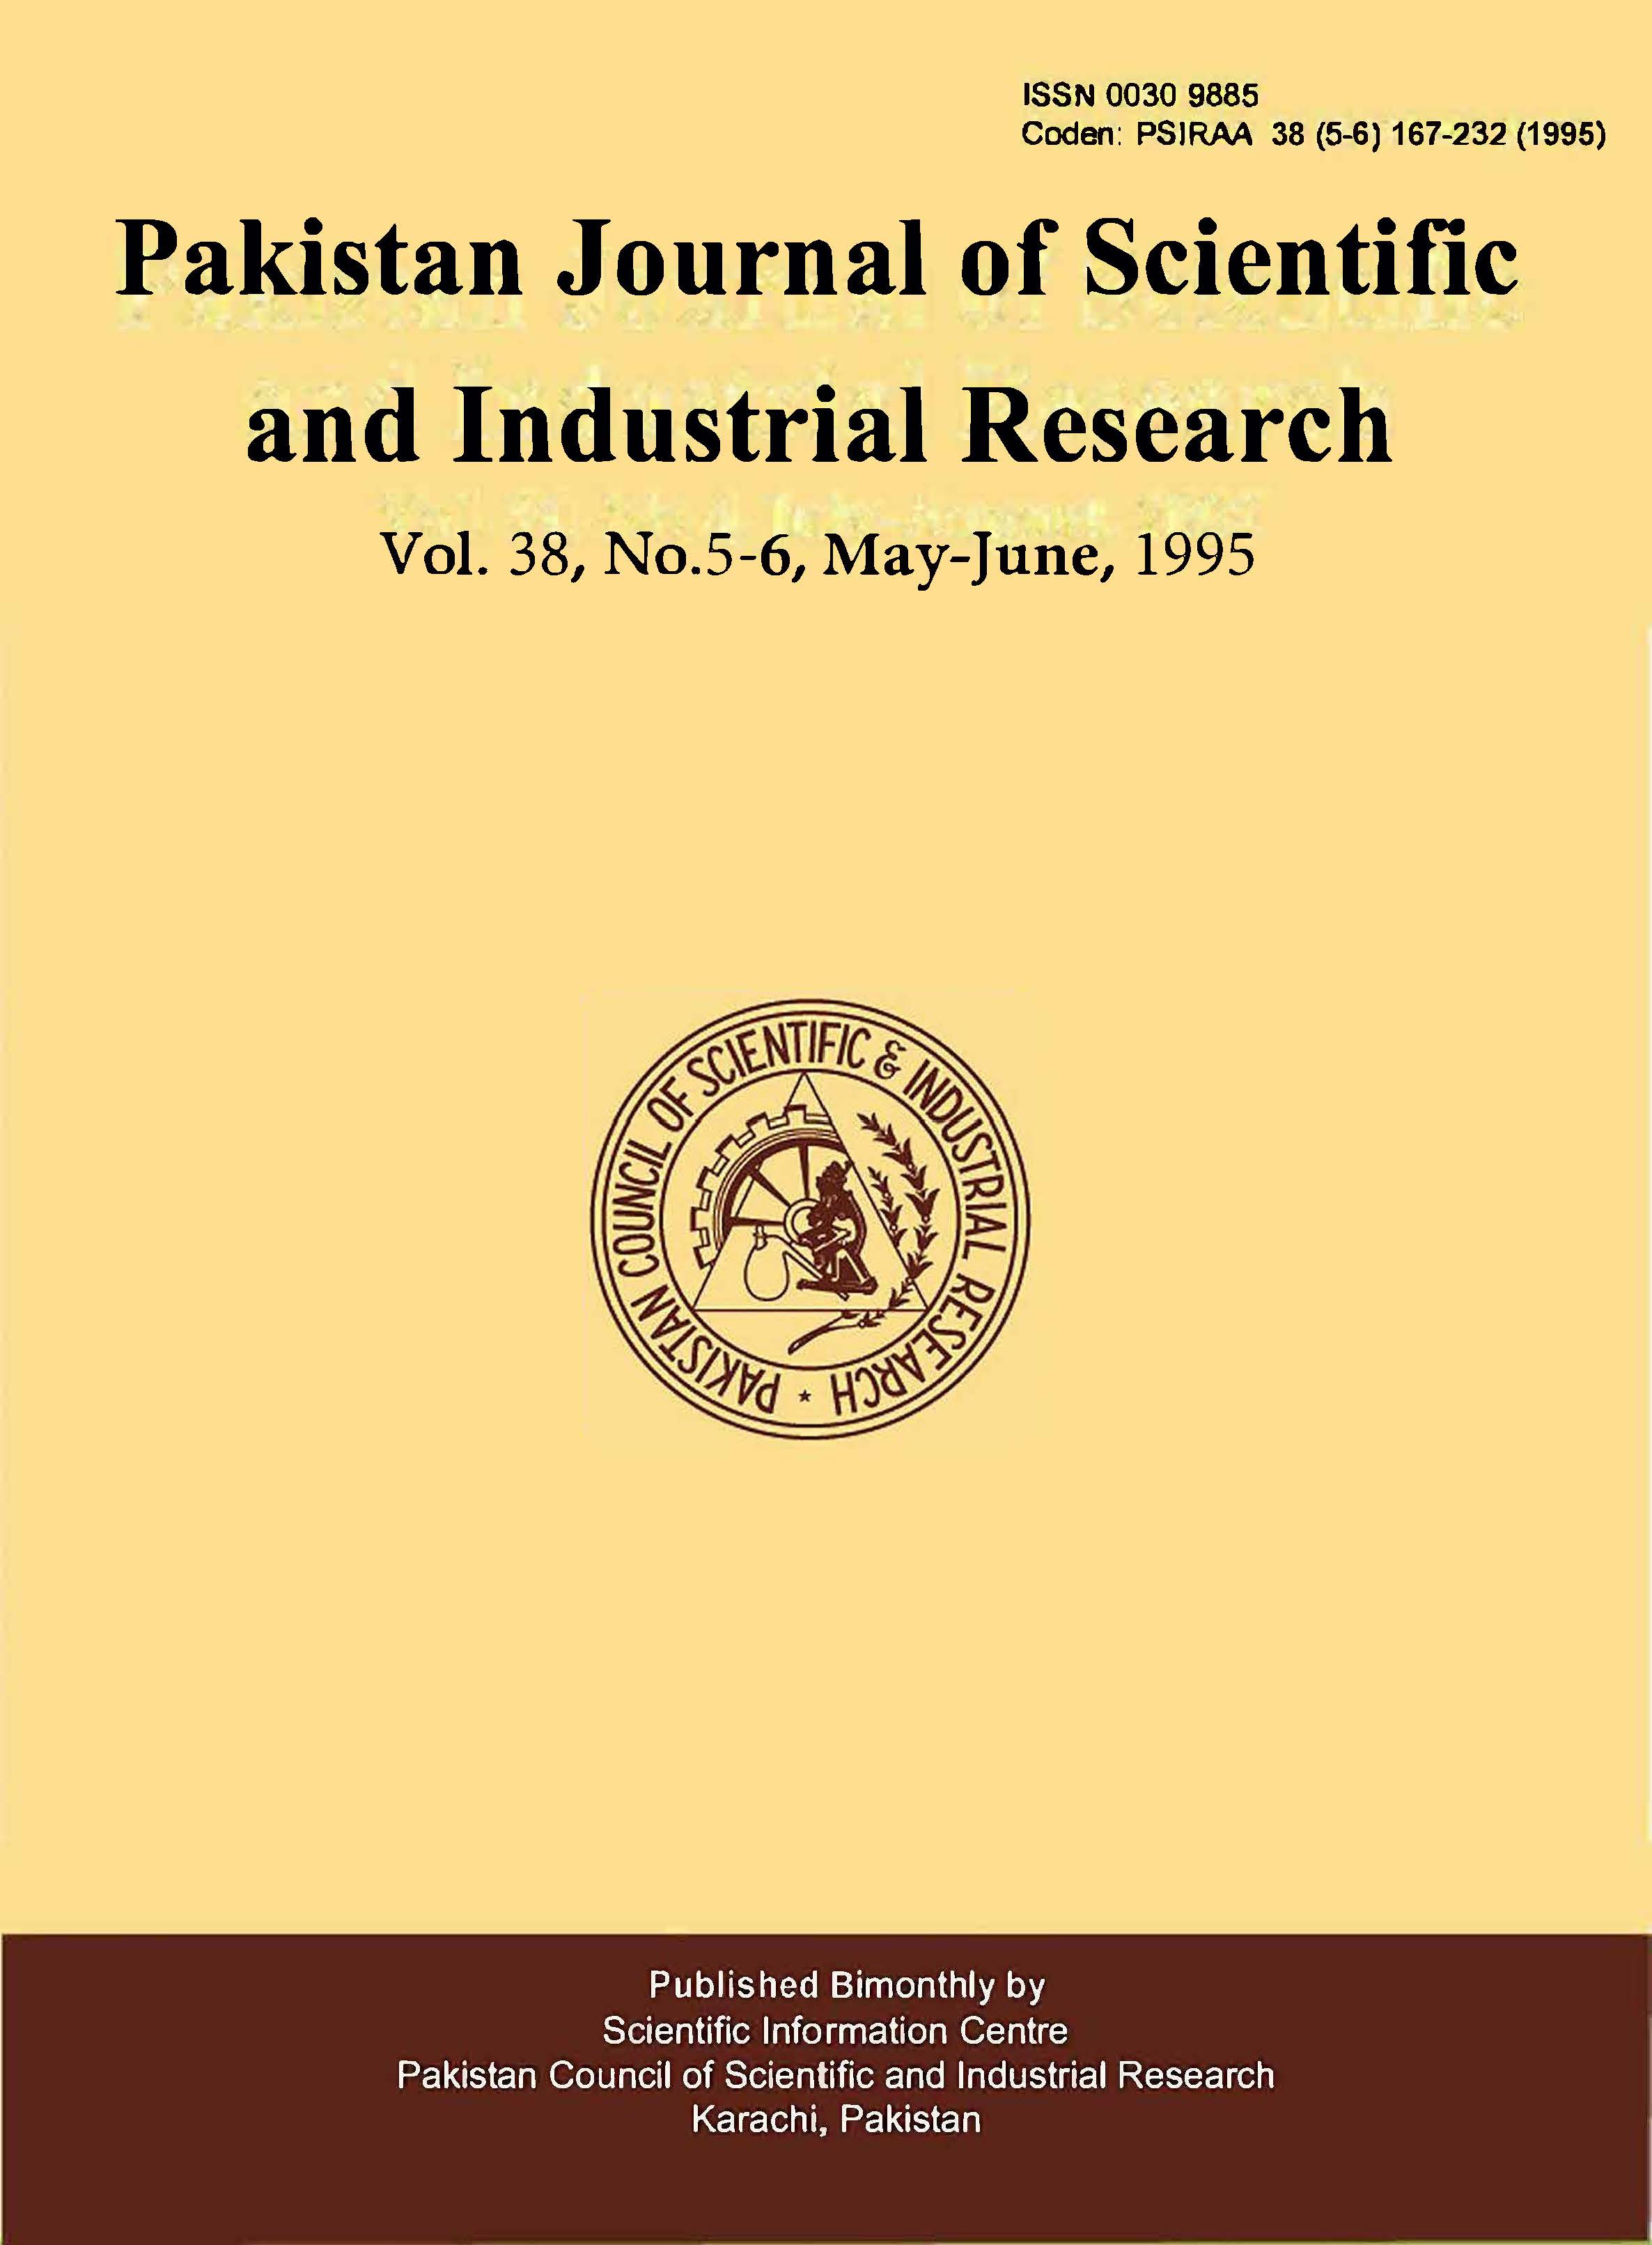 					View Vol. 38 No. 5-6 (1995): Pakistan Journal of Scientific and Industrial Research
				